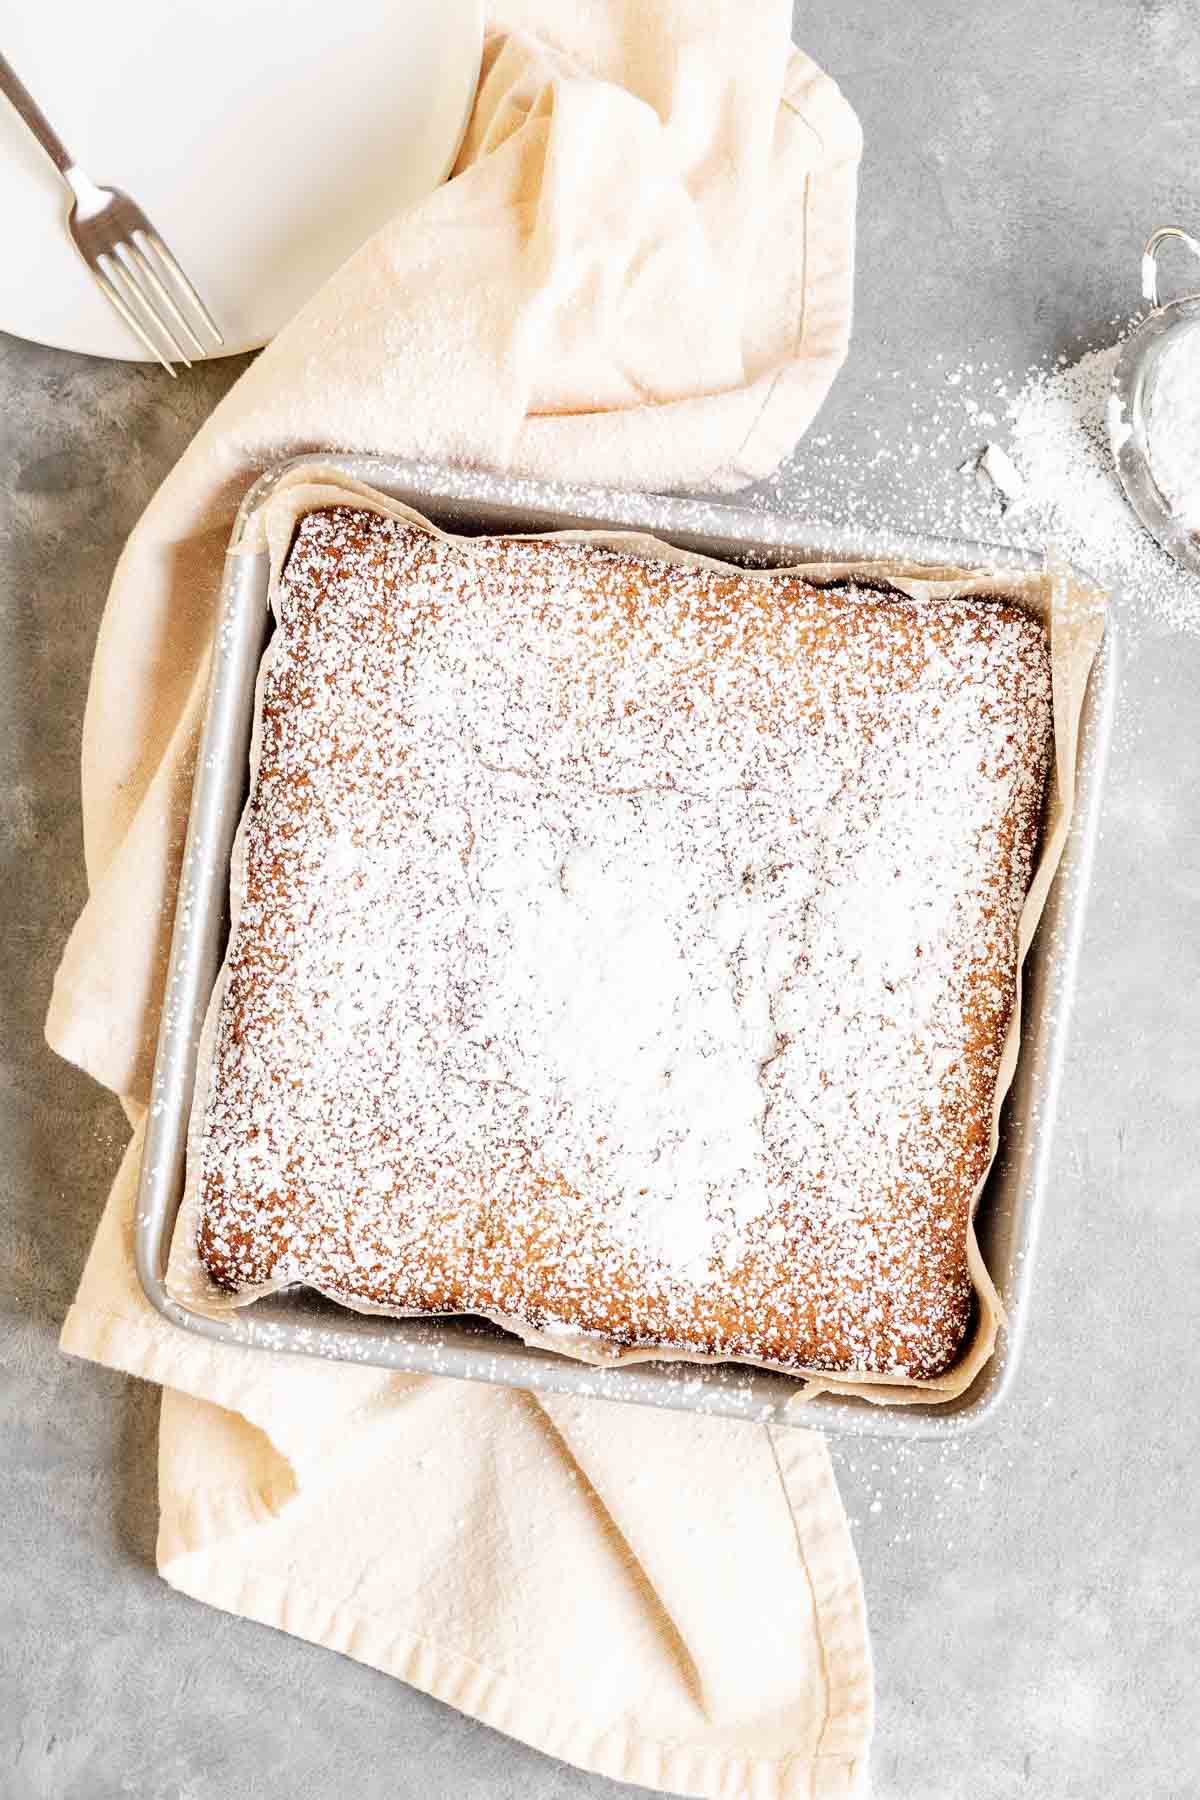 Butter Cake in 8x8 baking pan after baking with powdered sugar dusted